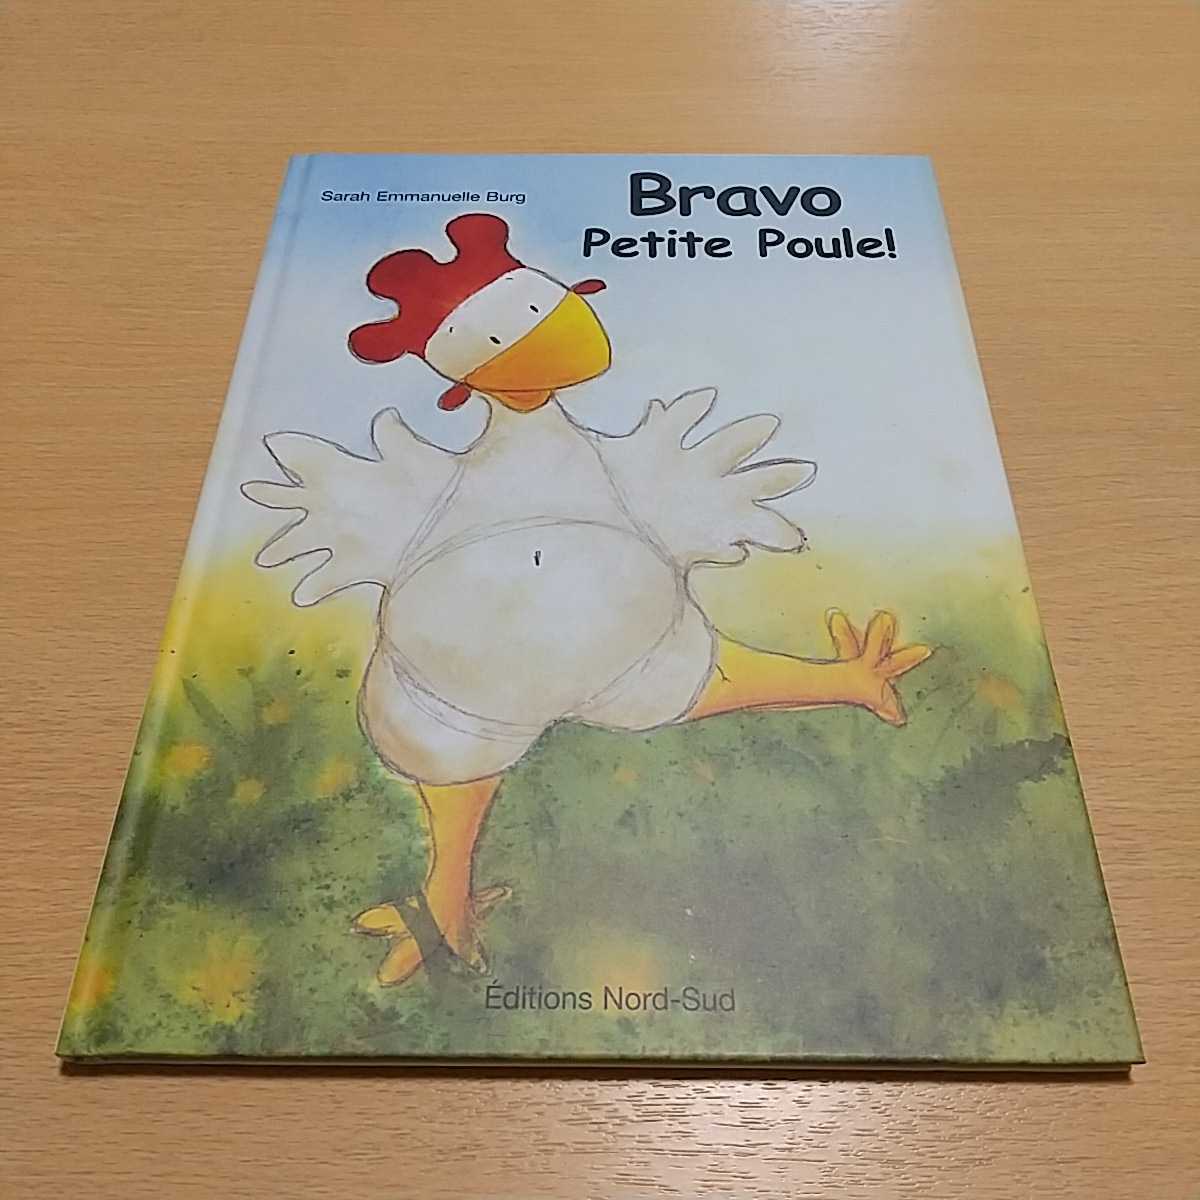 Bravo Petite Poule! French Picture Book Sarah Emmanuelle Burg Used French Picture Book 00001F002, Children's books, Picture books, Picture books, Foreign books, Foreign Language Picture Books